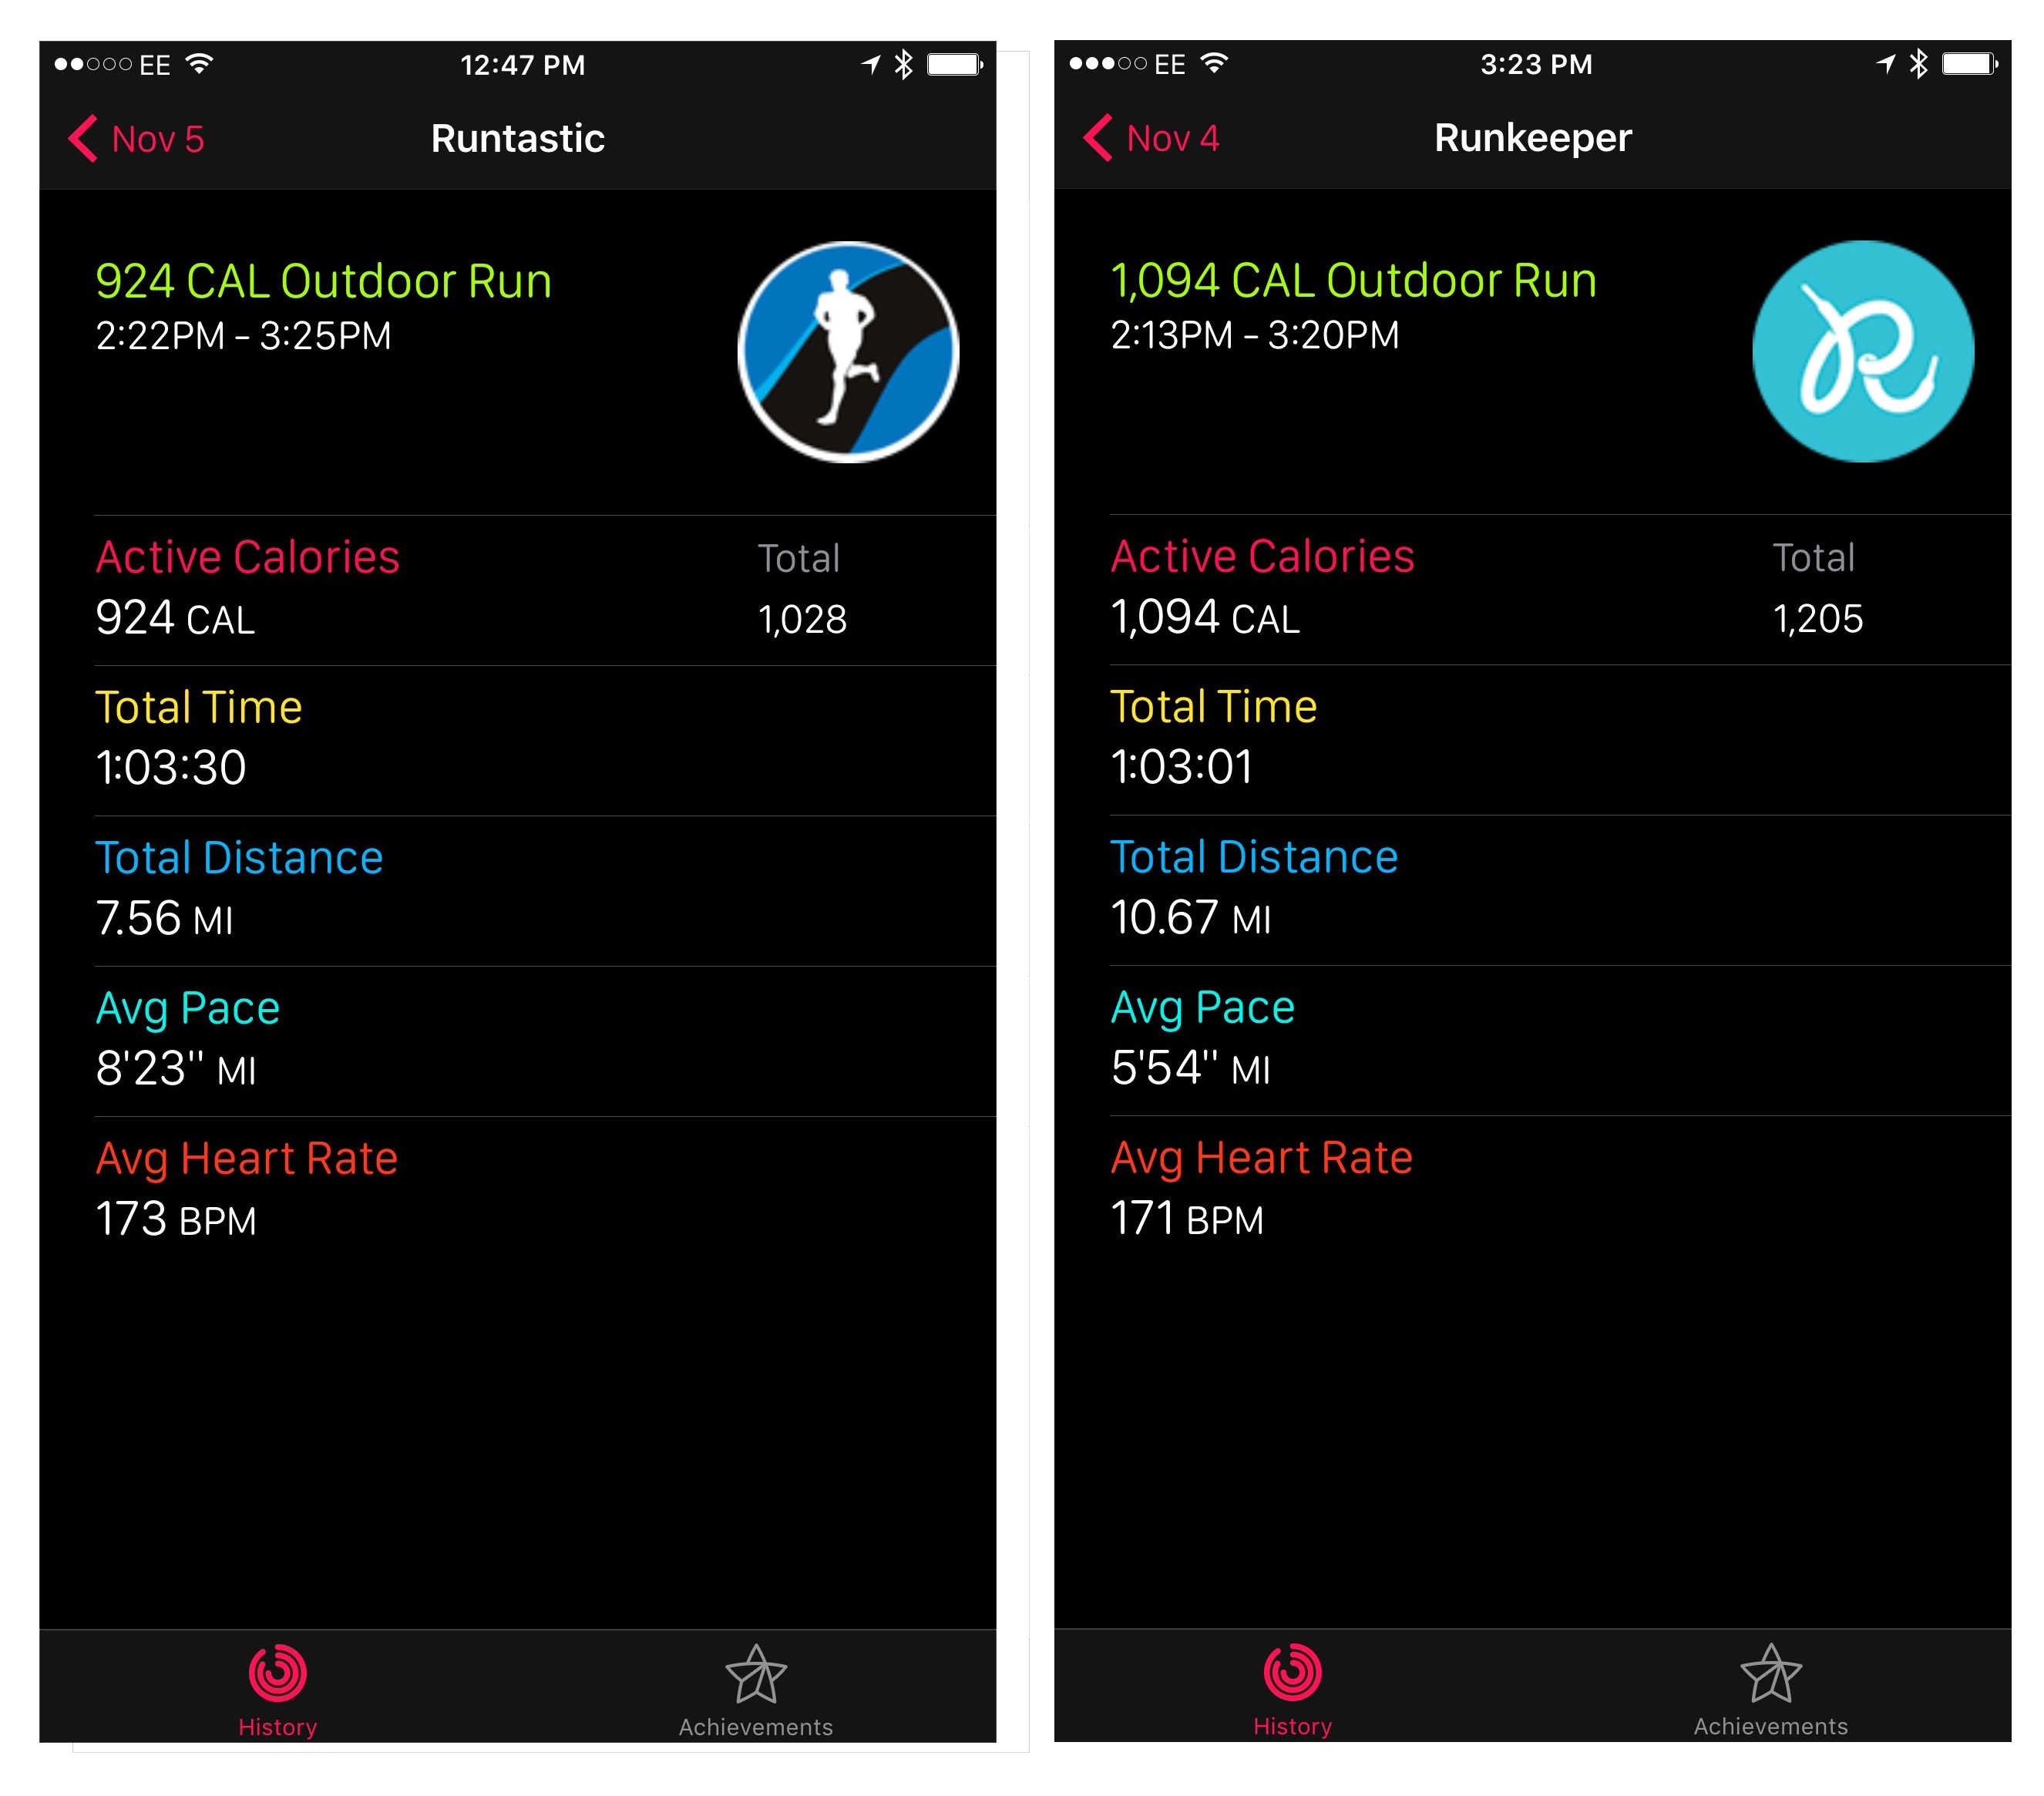 Third-party watchOS 2 running apps can display workouts within the Activity app